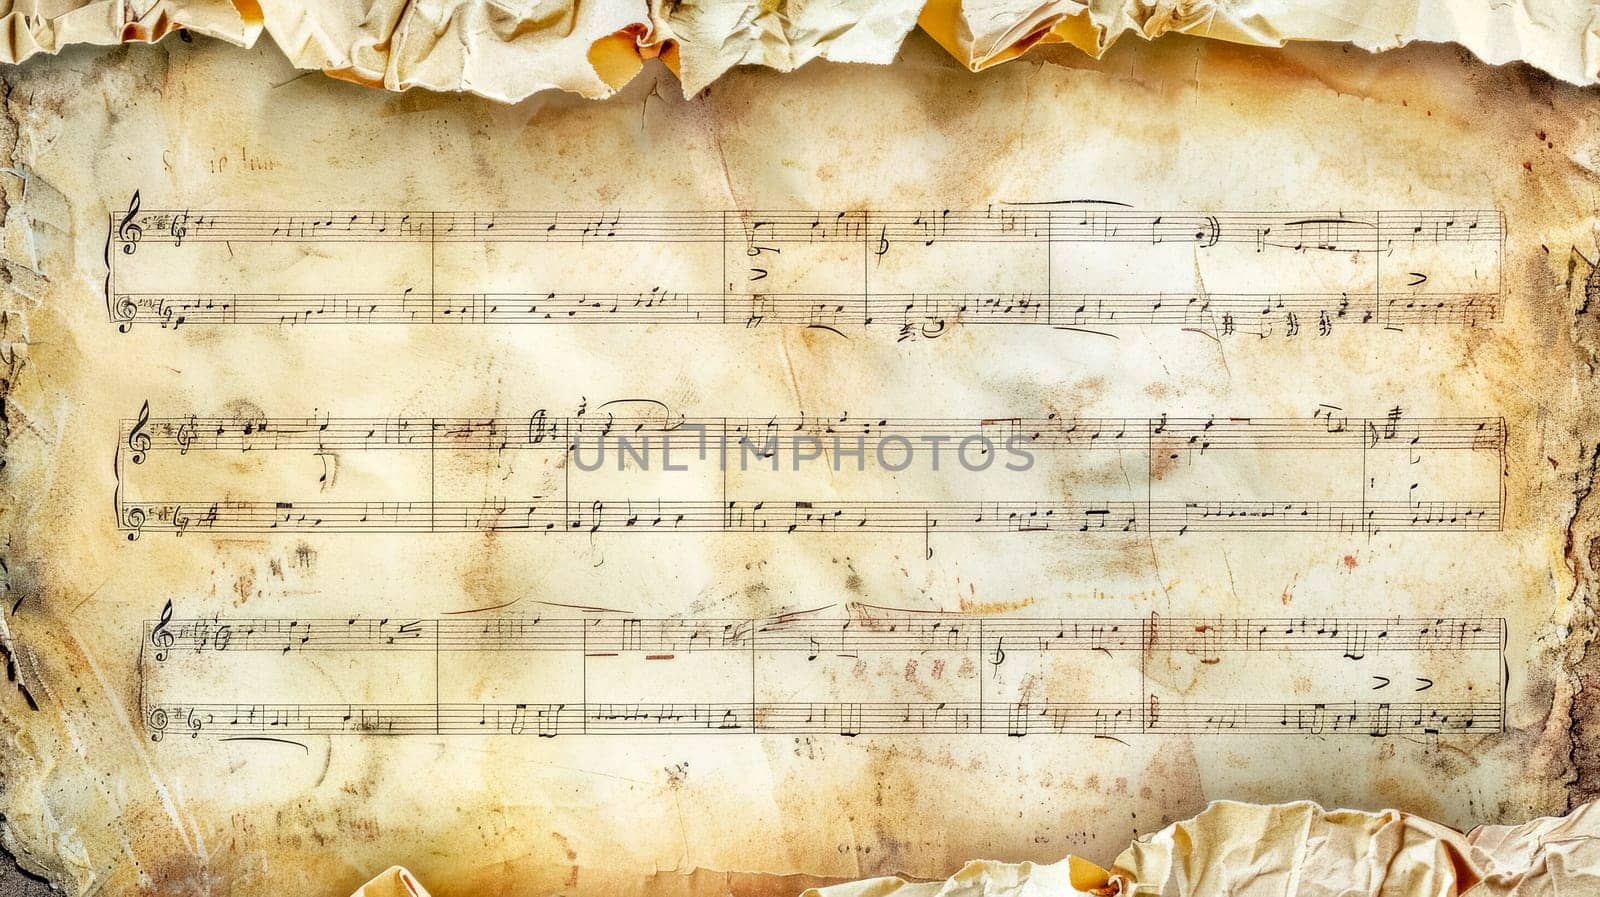 Vintage music sheet background with aged paper and classical musical notes on historical manuscript, old parchment with burned edges and grunge texture, perfect for artistic retro projects